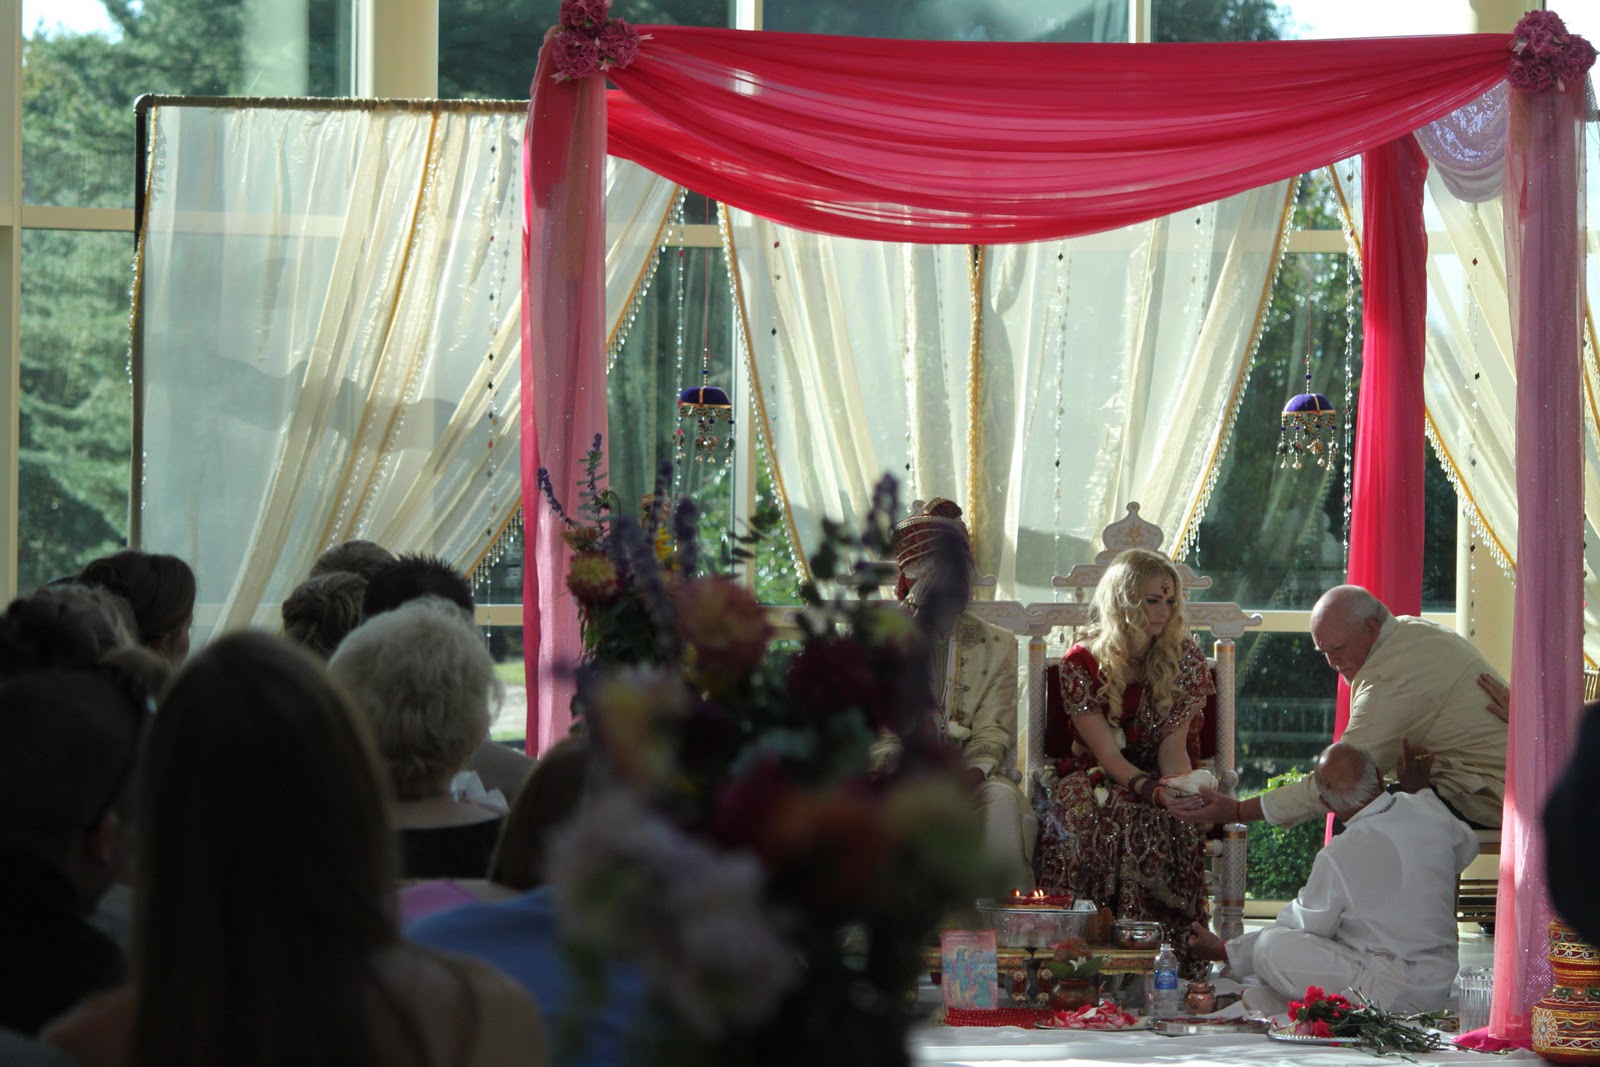 Seating under the mandap on